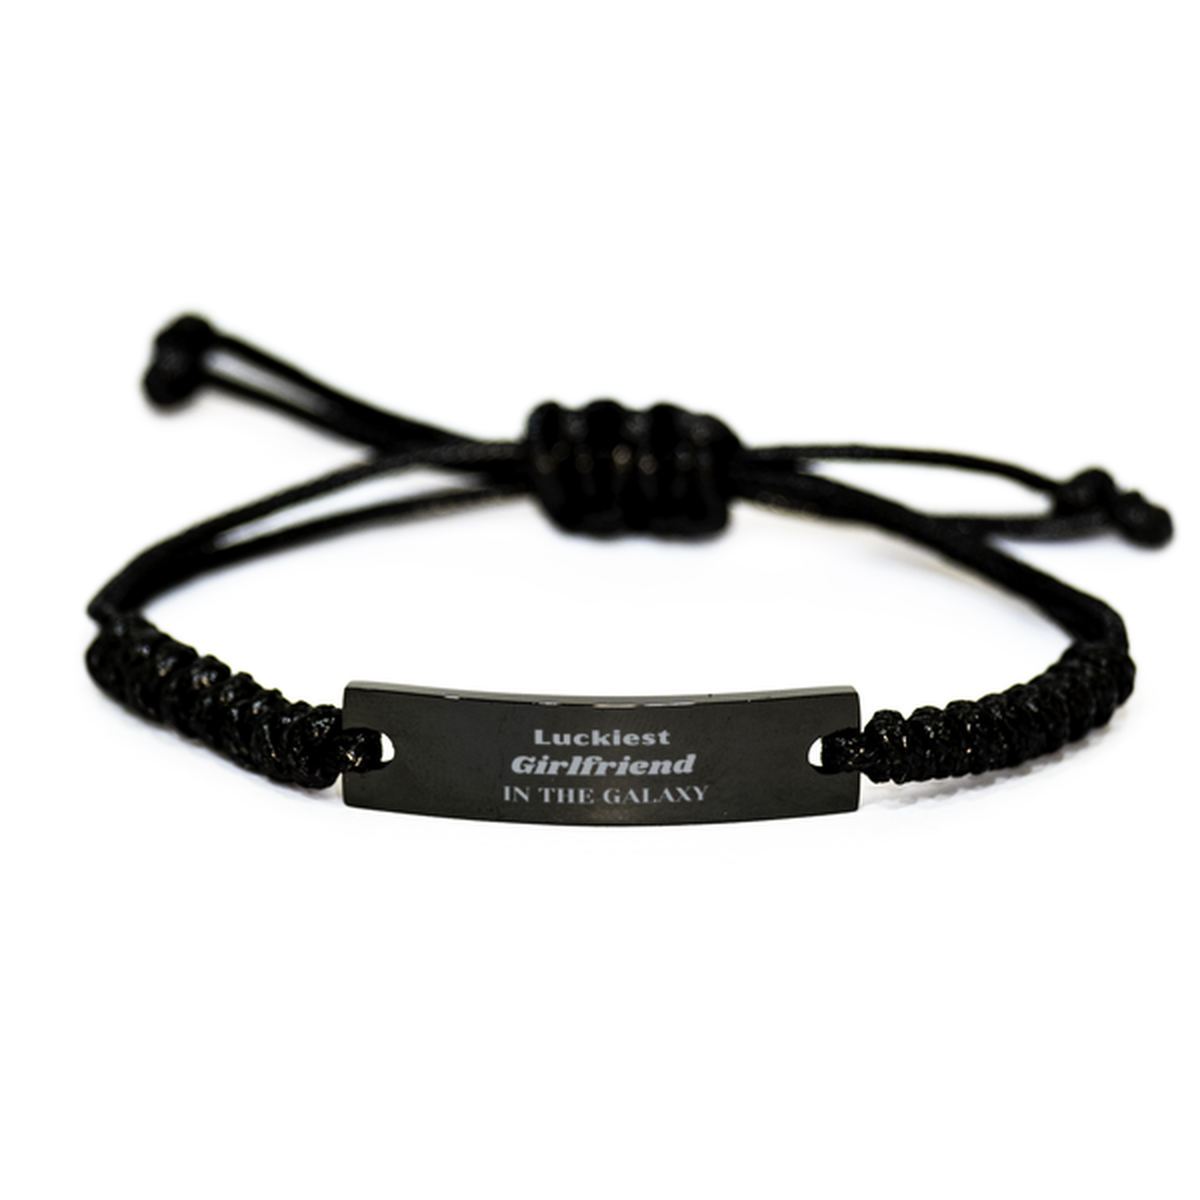 Luckiest Girlfriend in the Galaxy, To My Girlfriend Engraved Gifts, Christmas Girlfriend Black Rope Bracelet Gifts, X-mas Birthday Unique Gifts For Girlfriend Men Women